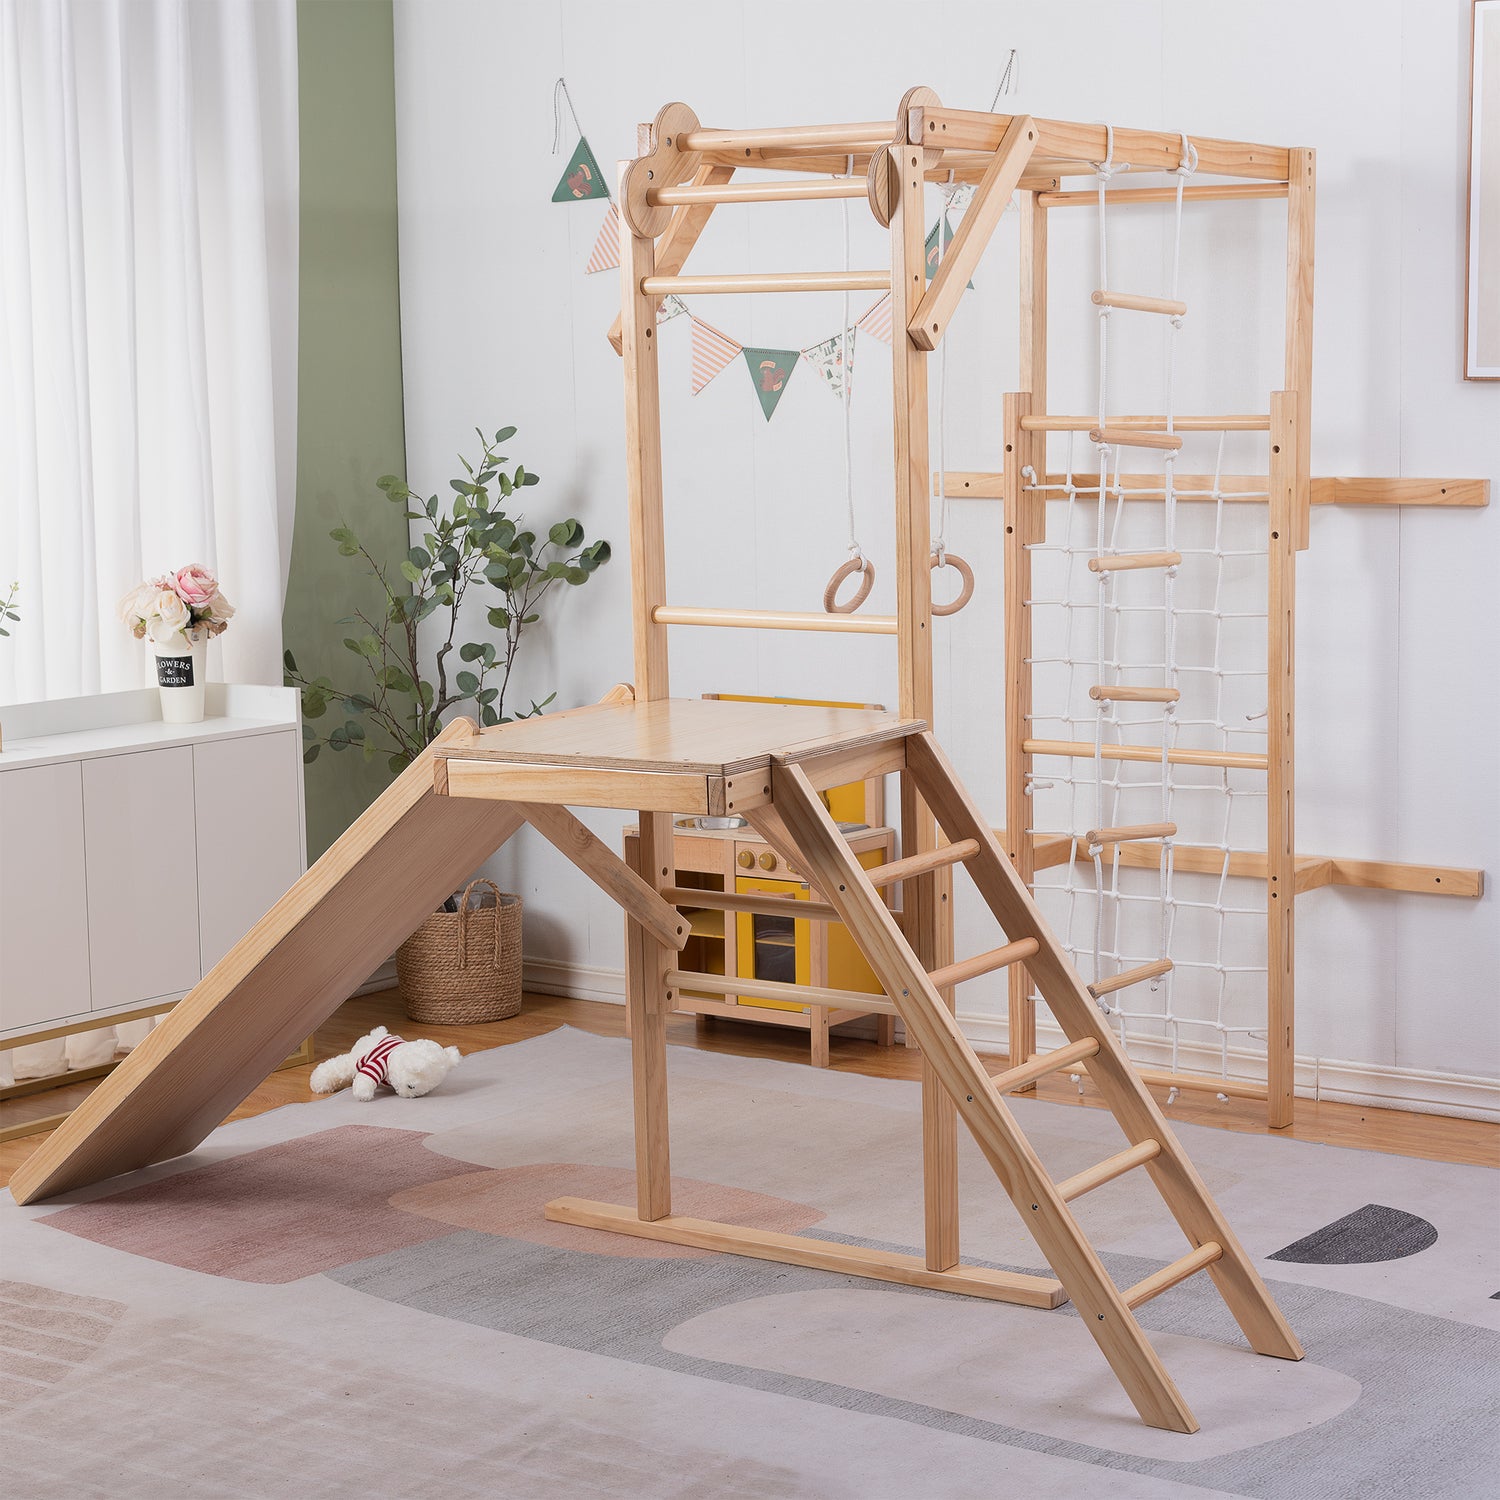 The Grove Jungle Gym - Avenlur's Premium 8 in 1 Wooden Playset for Older Kids in Natural Wood Color